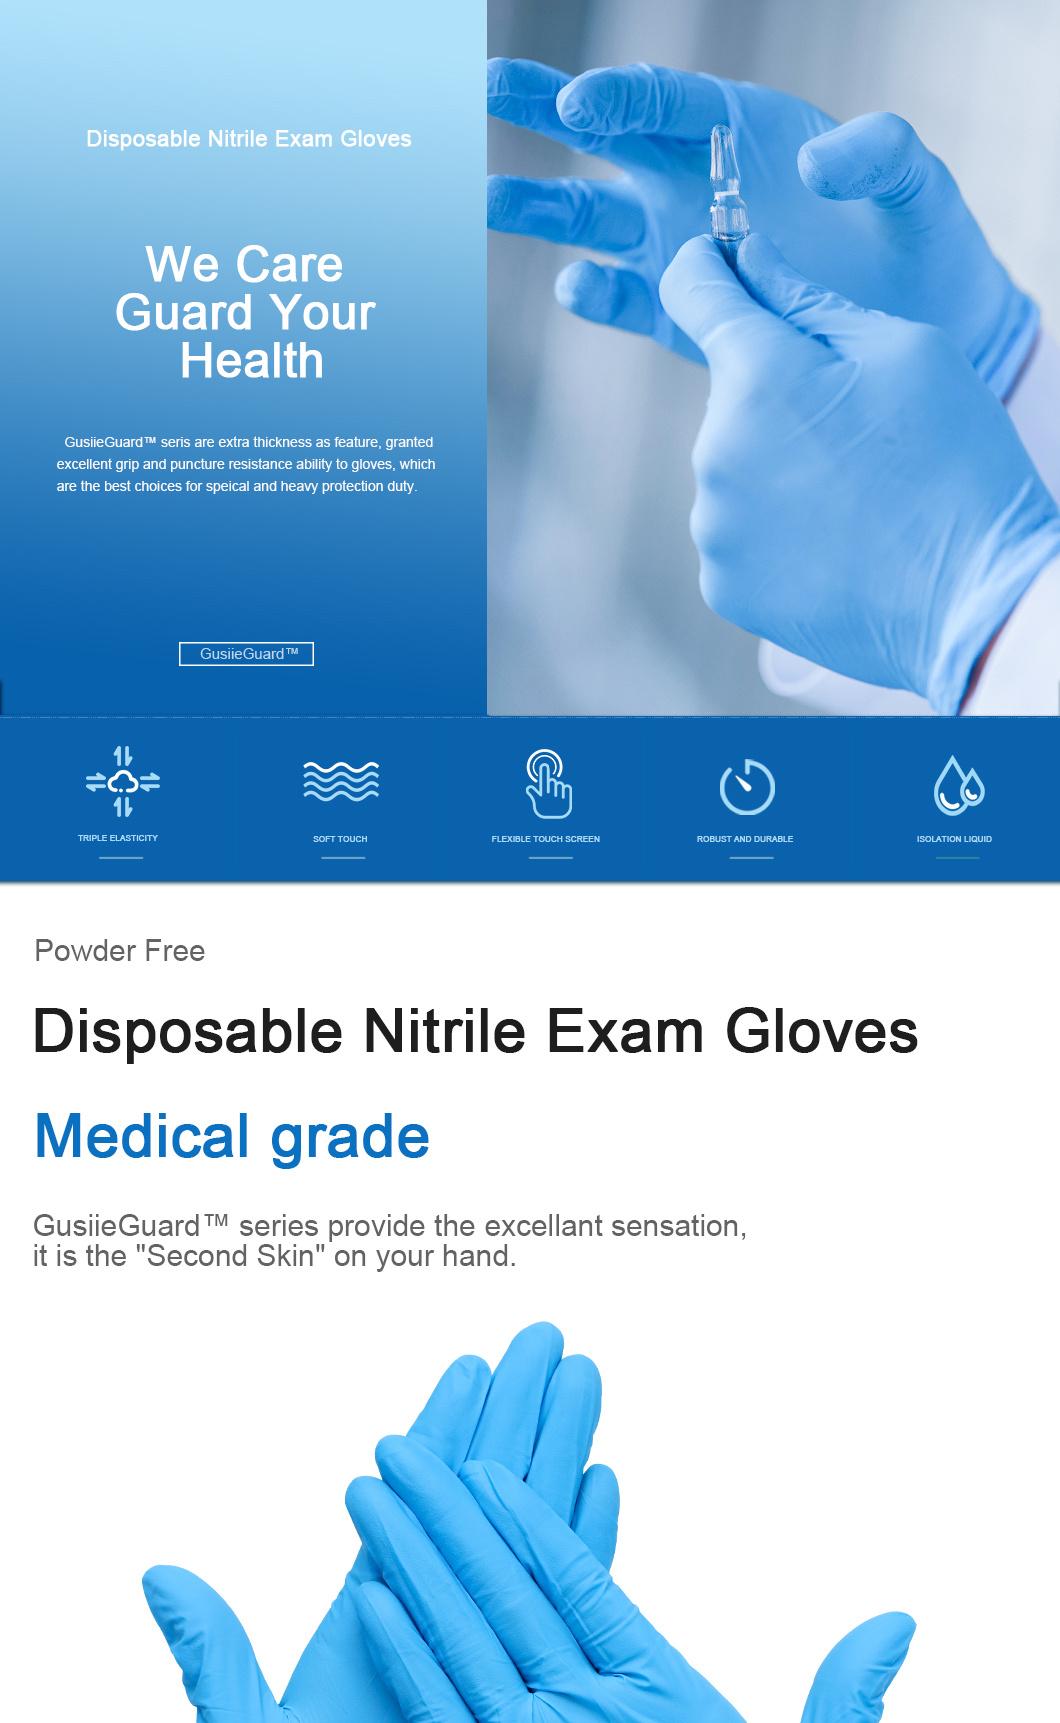 Gusiie Polychromatic Disposable Medical Examation Nitrile Large Gloves